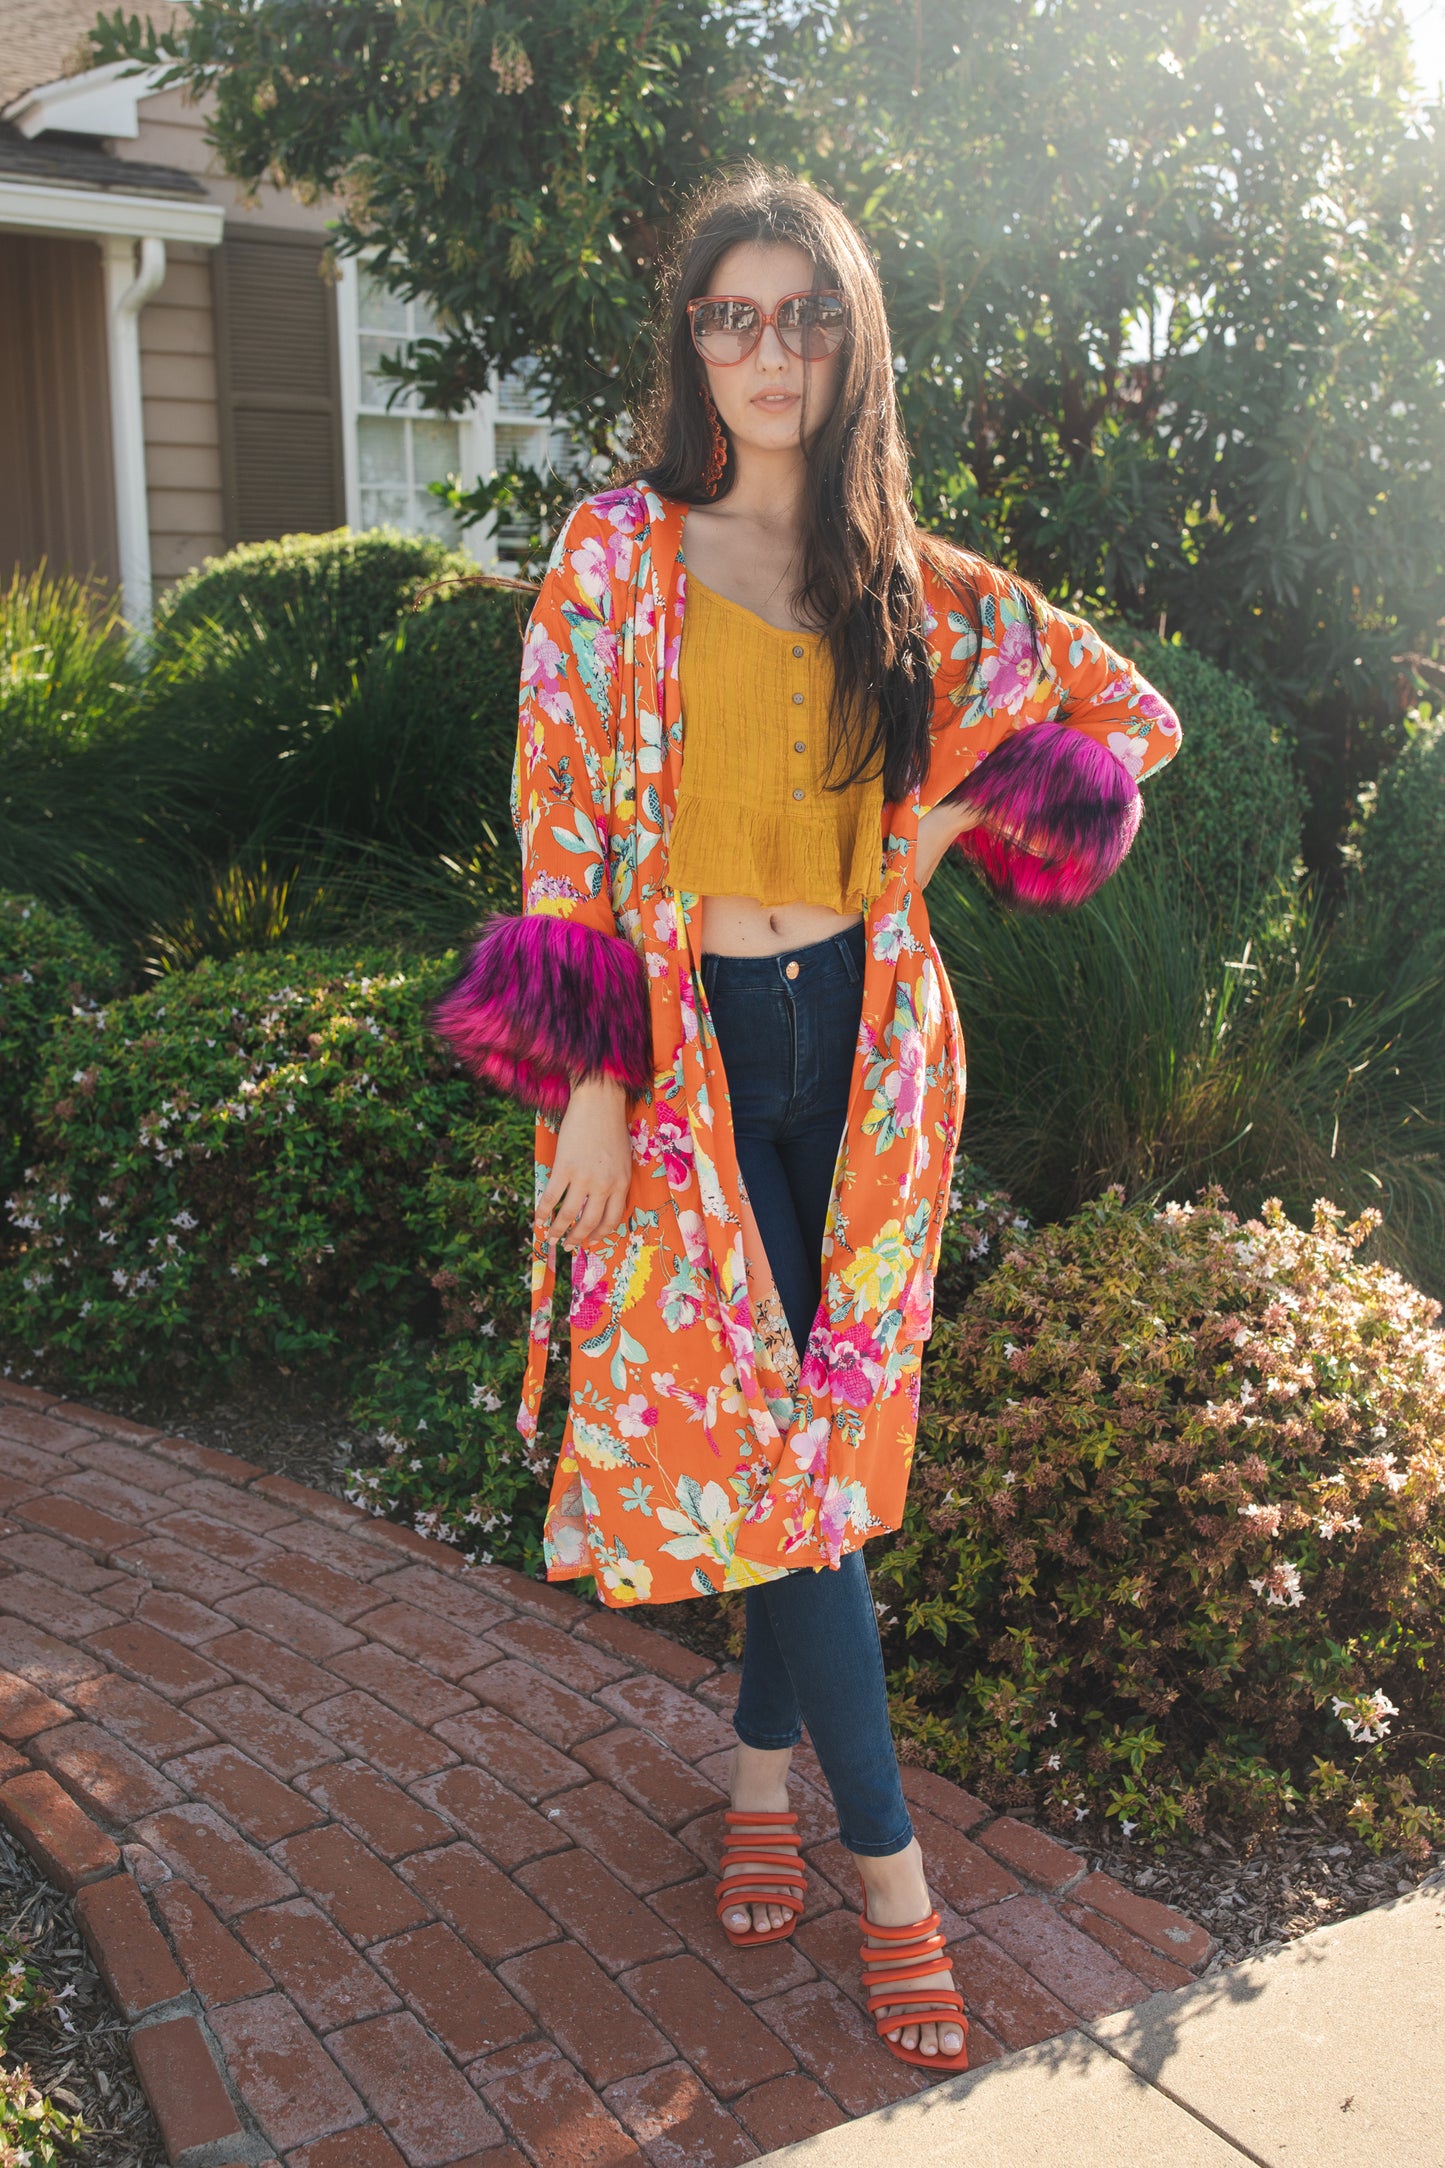 jennafer grace Neo Flora Faux Fur Koi Kimono neon orange floral pink yellow blue flowers contrast lining hot pink fuchsia faux fur cuffs duster jacket robe retro 90s revival boho bohemian romantic whimsical old hollywood glam unisex handmade in California USA